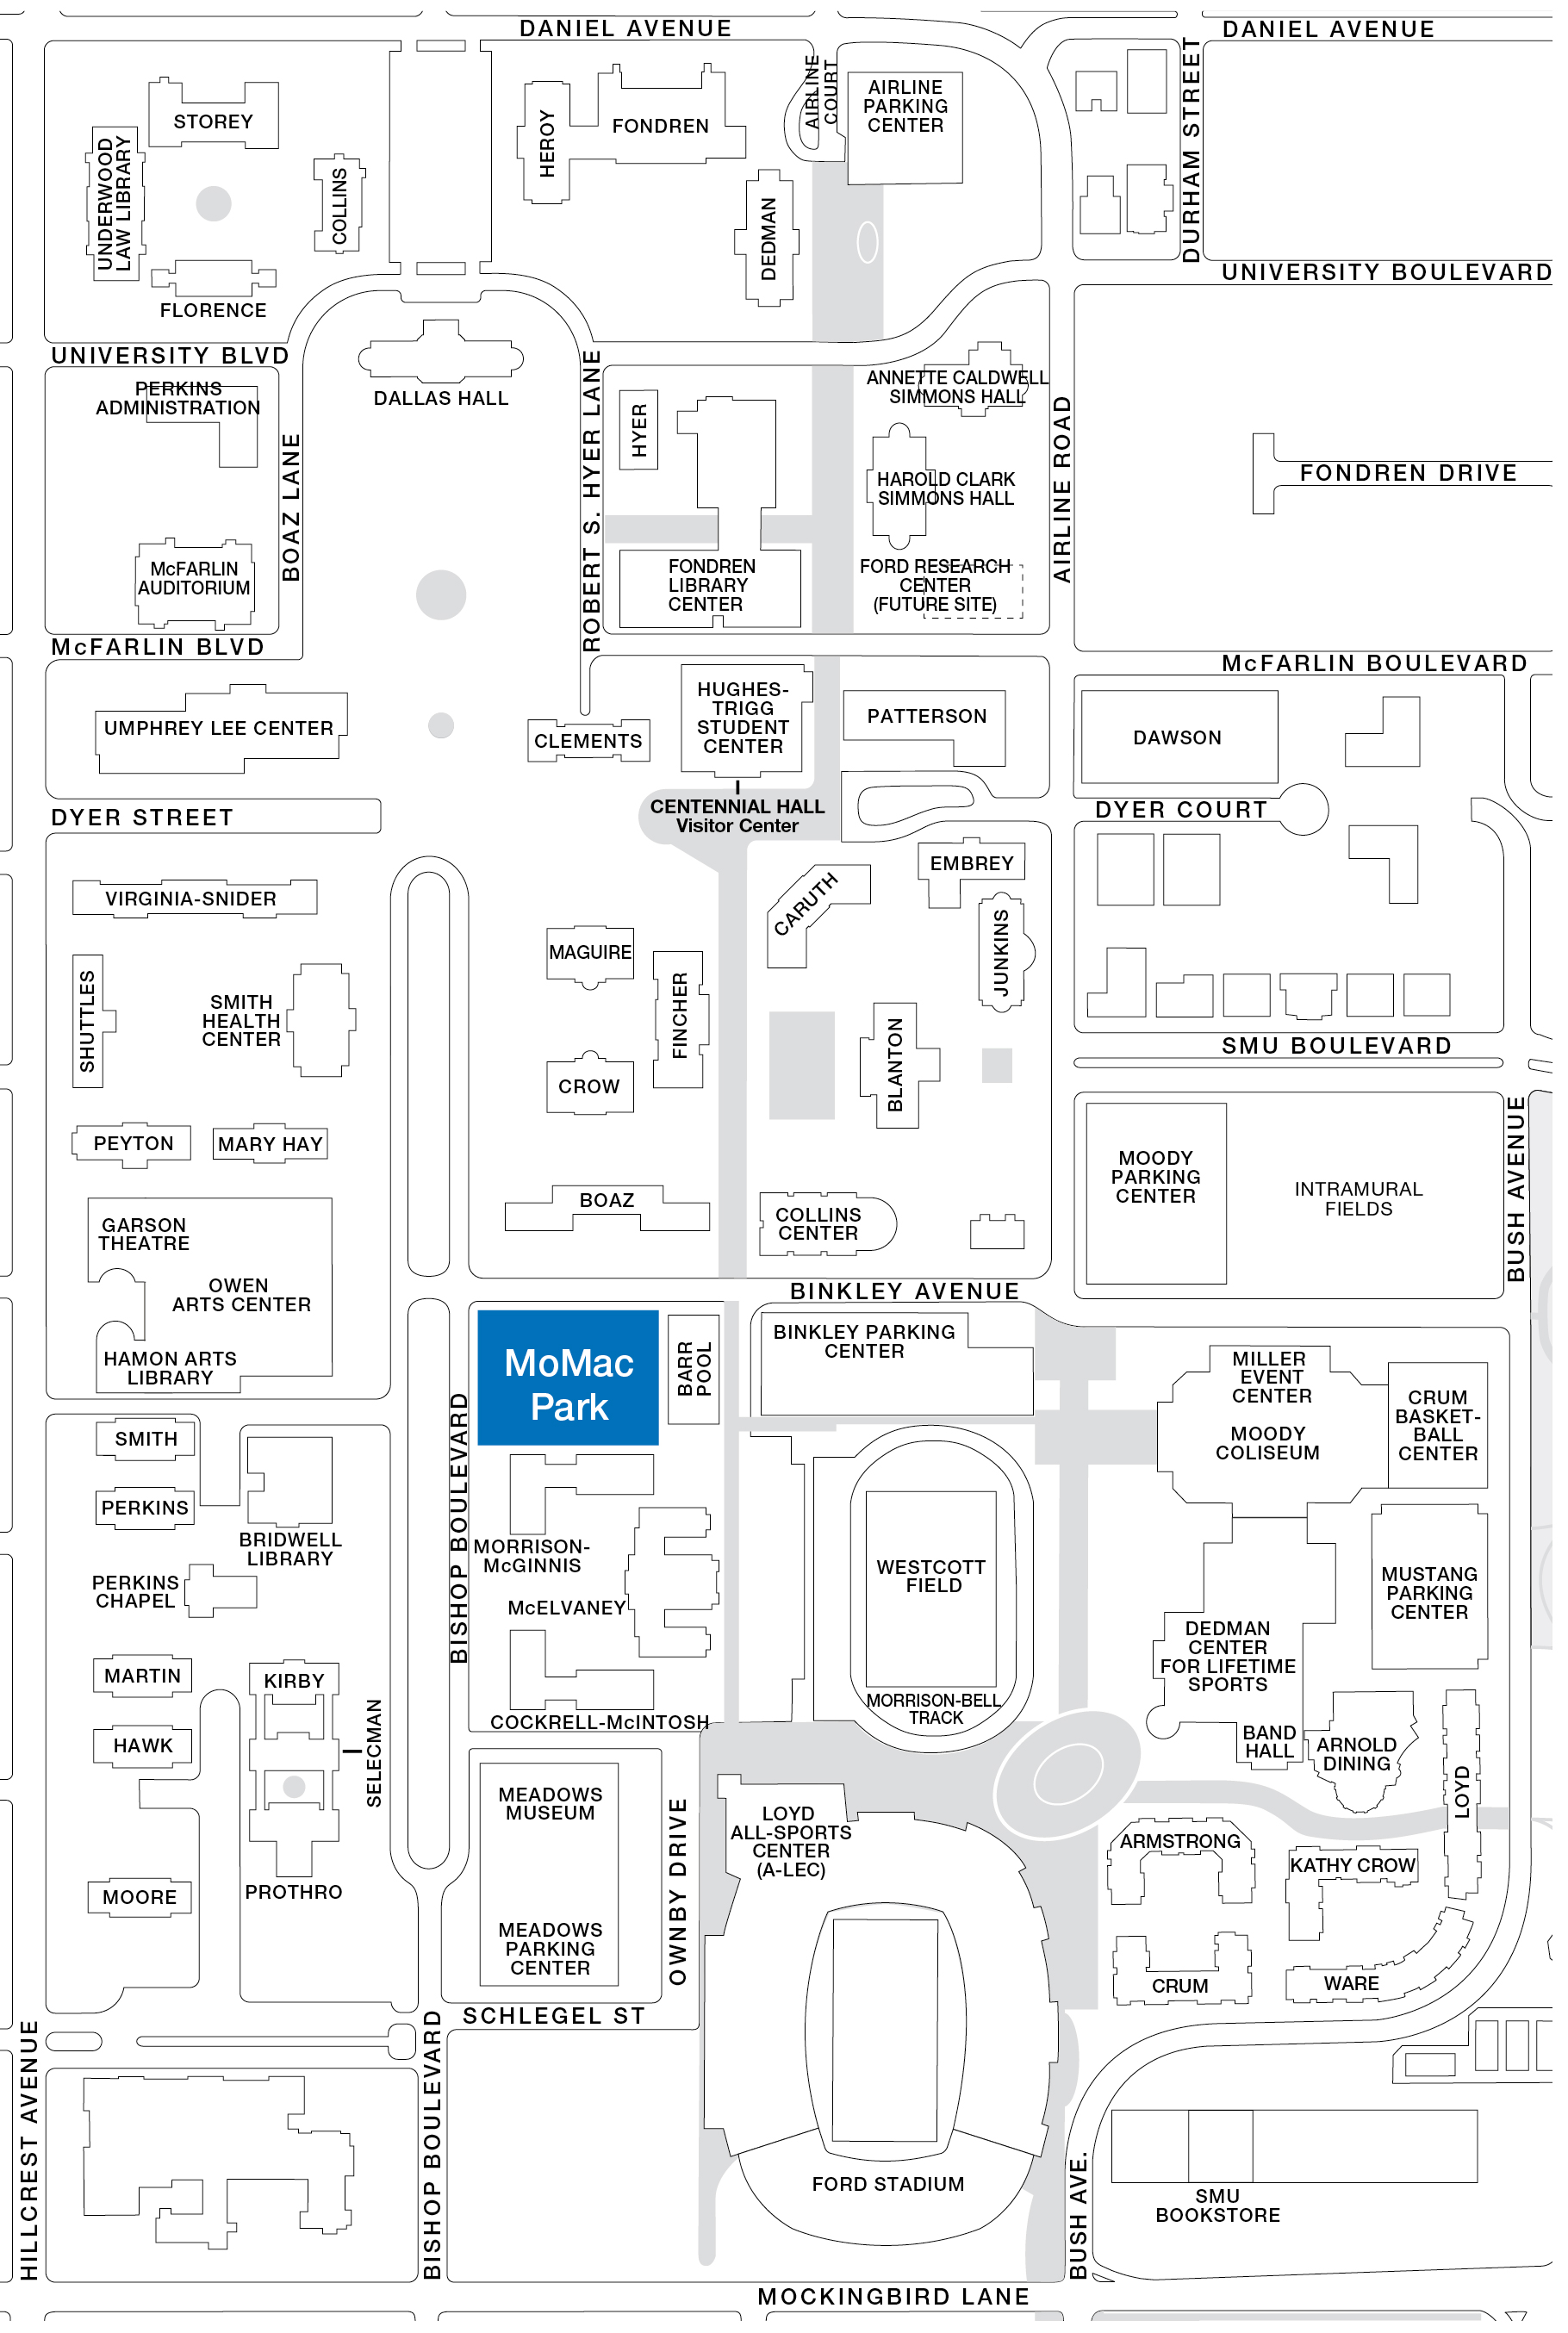 Campus map for lawn displays